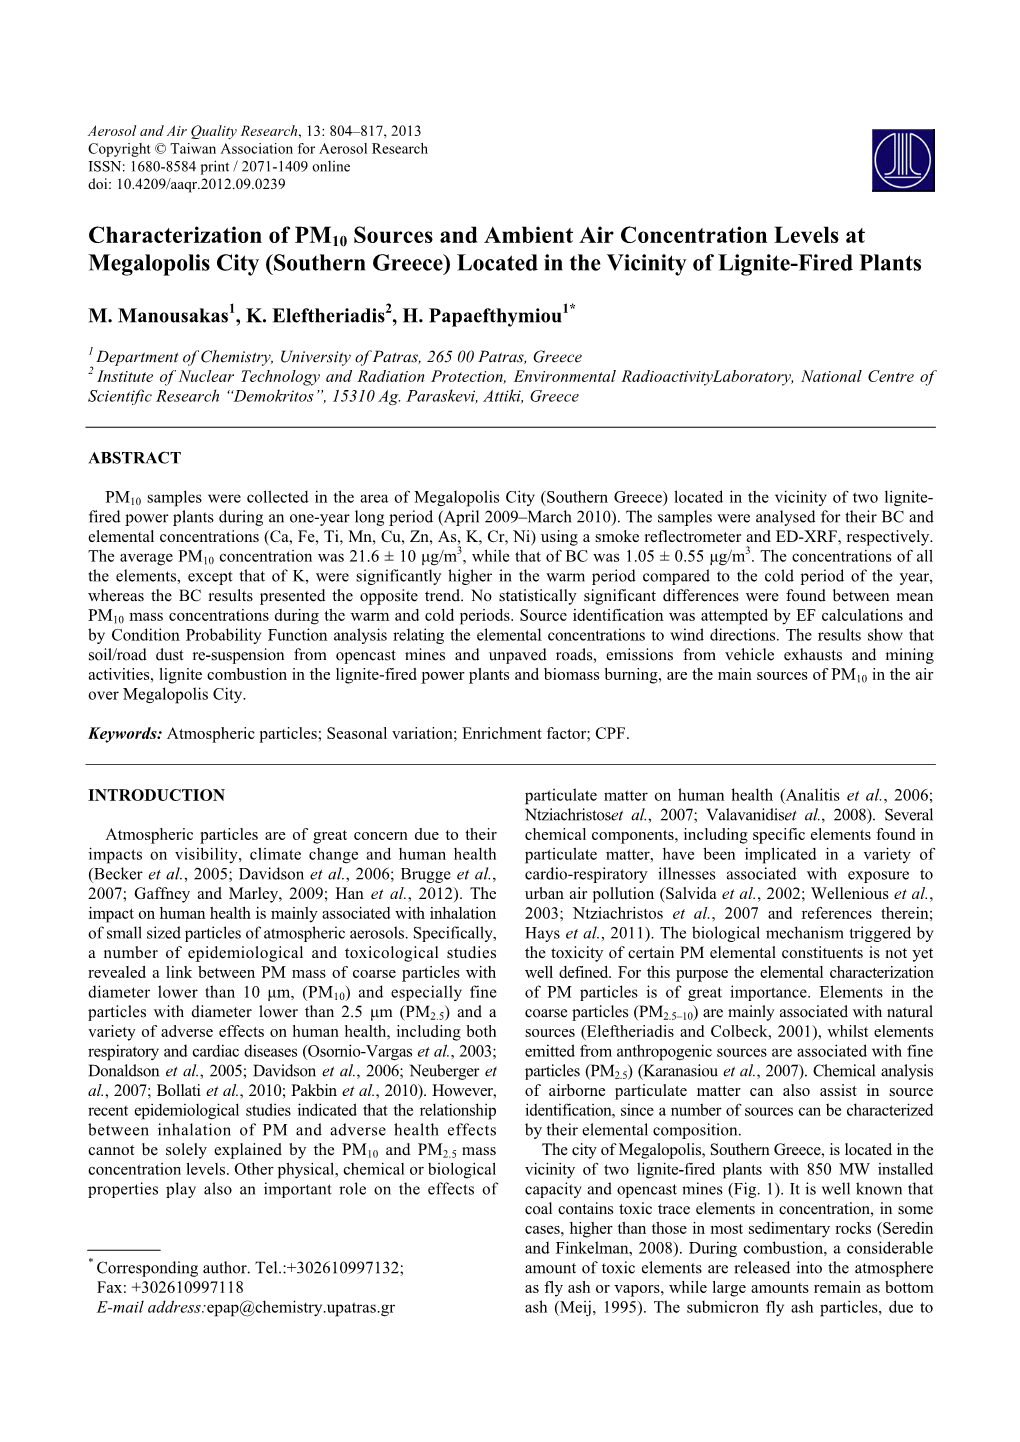 Characterization of PM10 Sources and Ambient Air Concentration Levels at Megalopolis City (Southern Greece) Located in the Vicinity of Lignite-Fired Plants